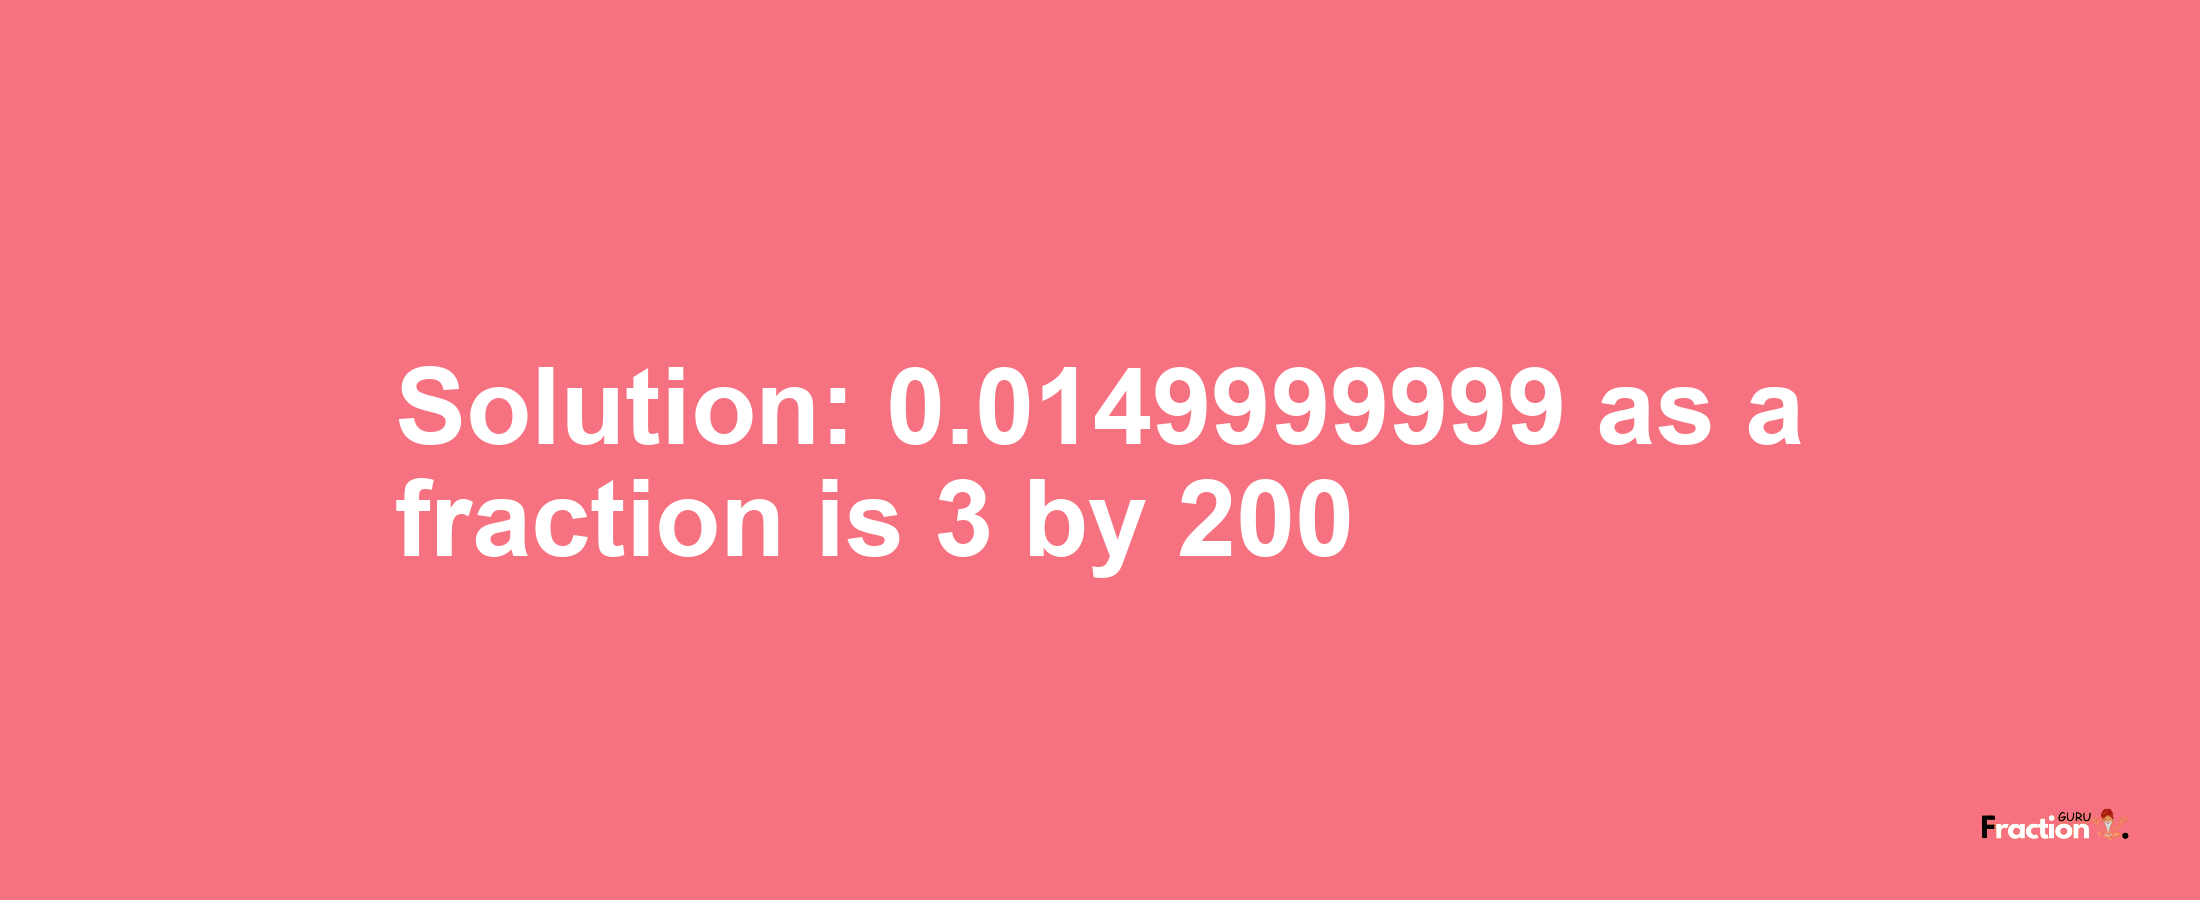 Solution:0.0149999999 as a fraction is 3/200